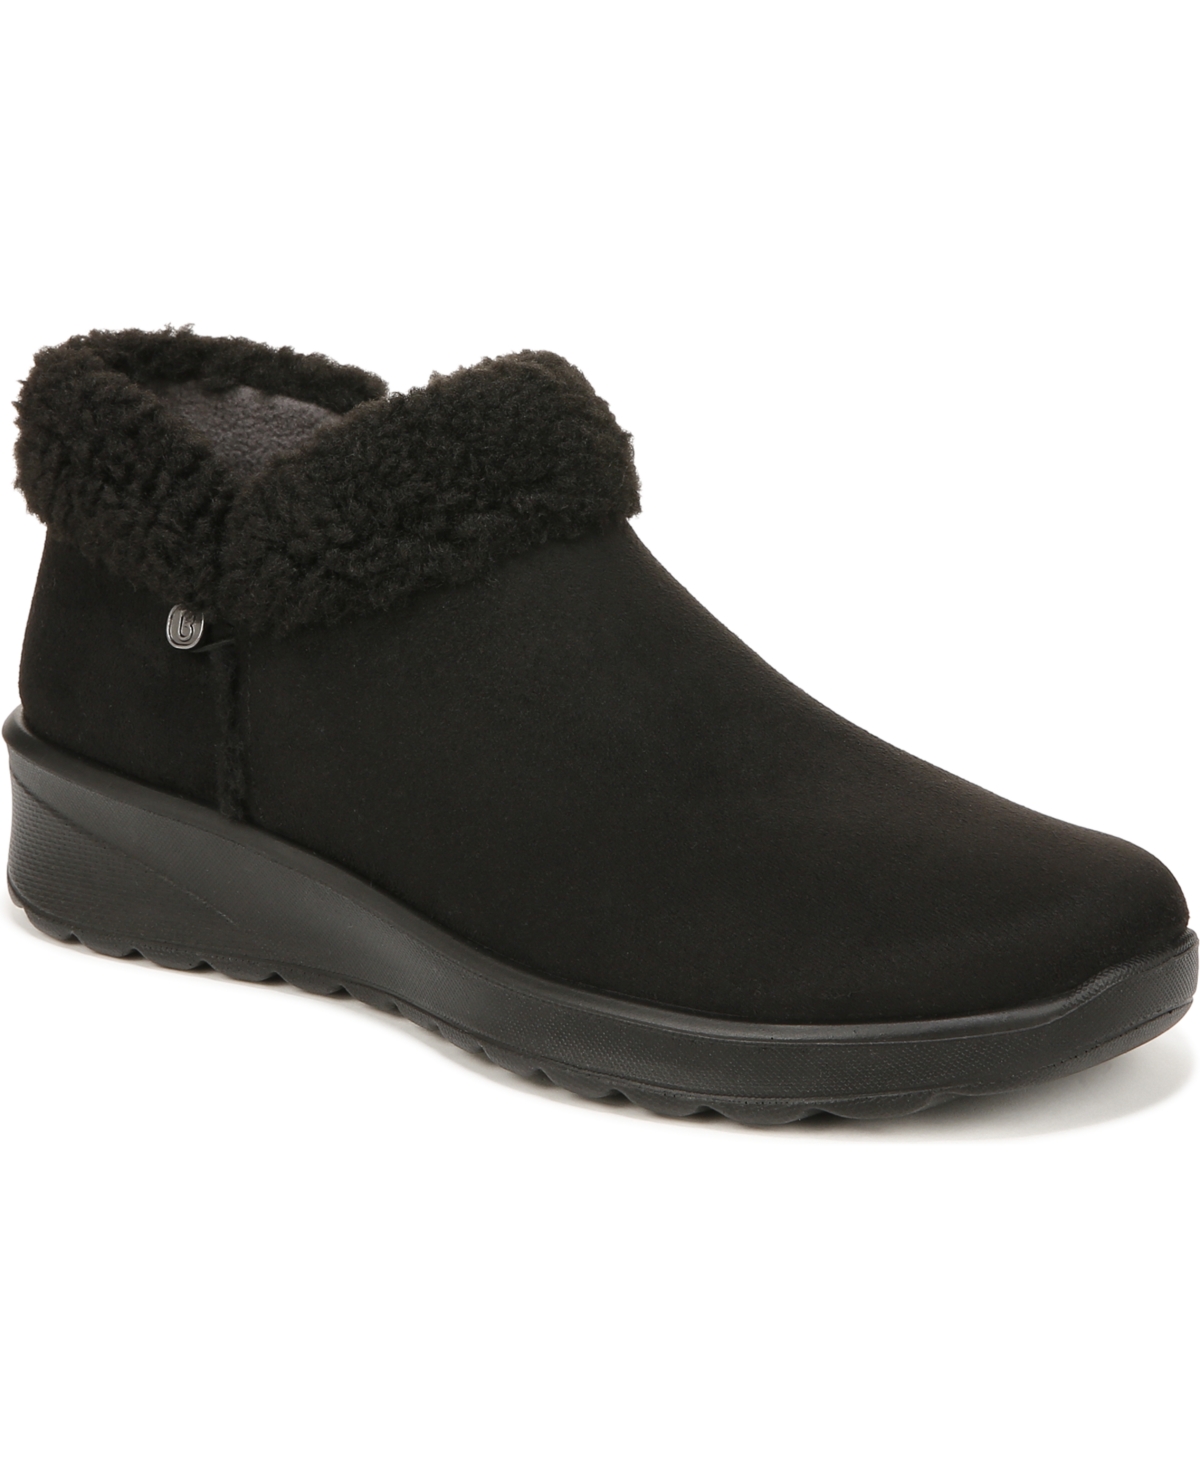 Gift Washable Booties - Black Stretch Microfiber